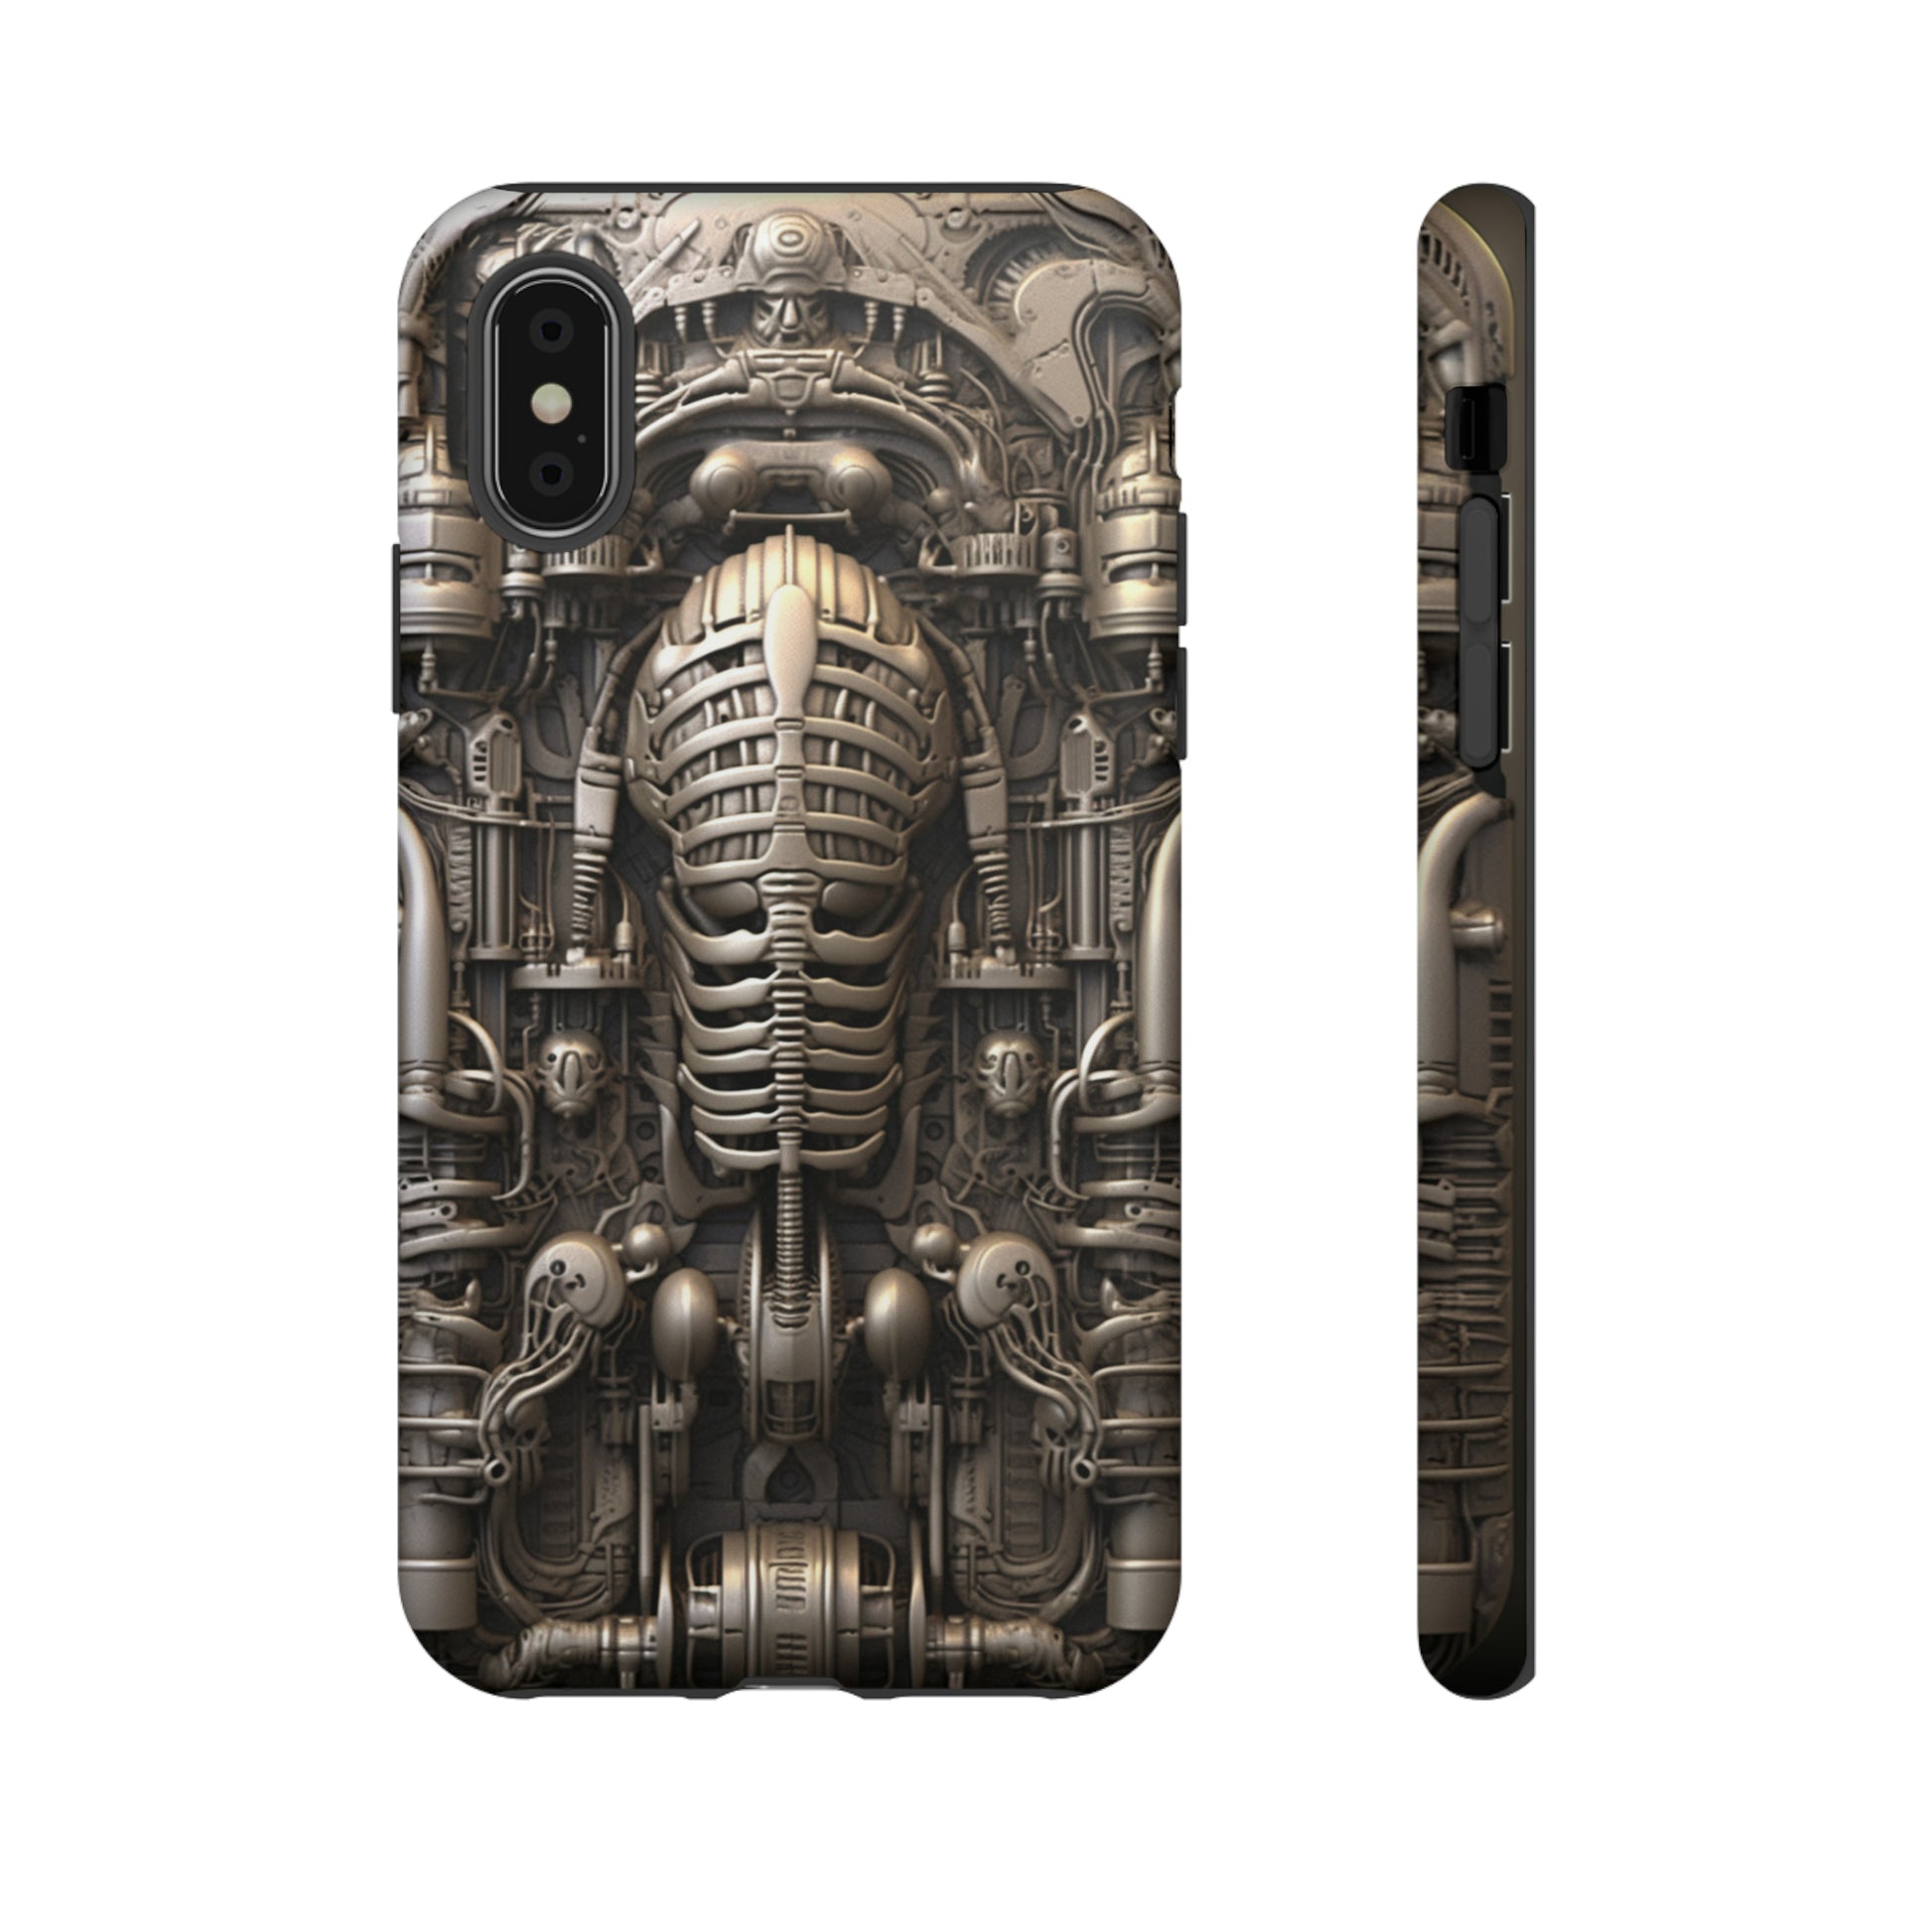 HR giger phone cover